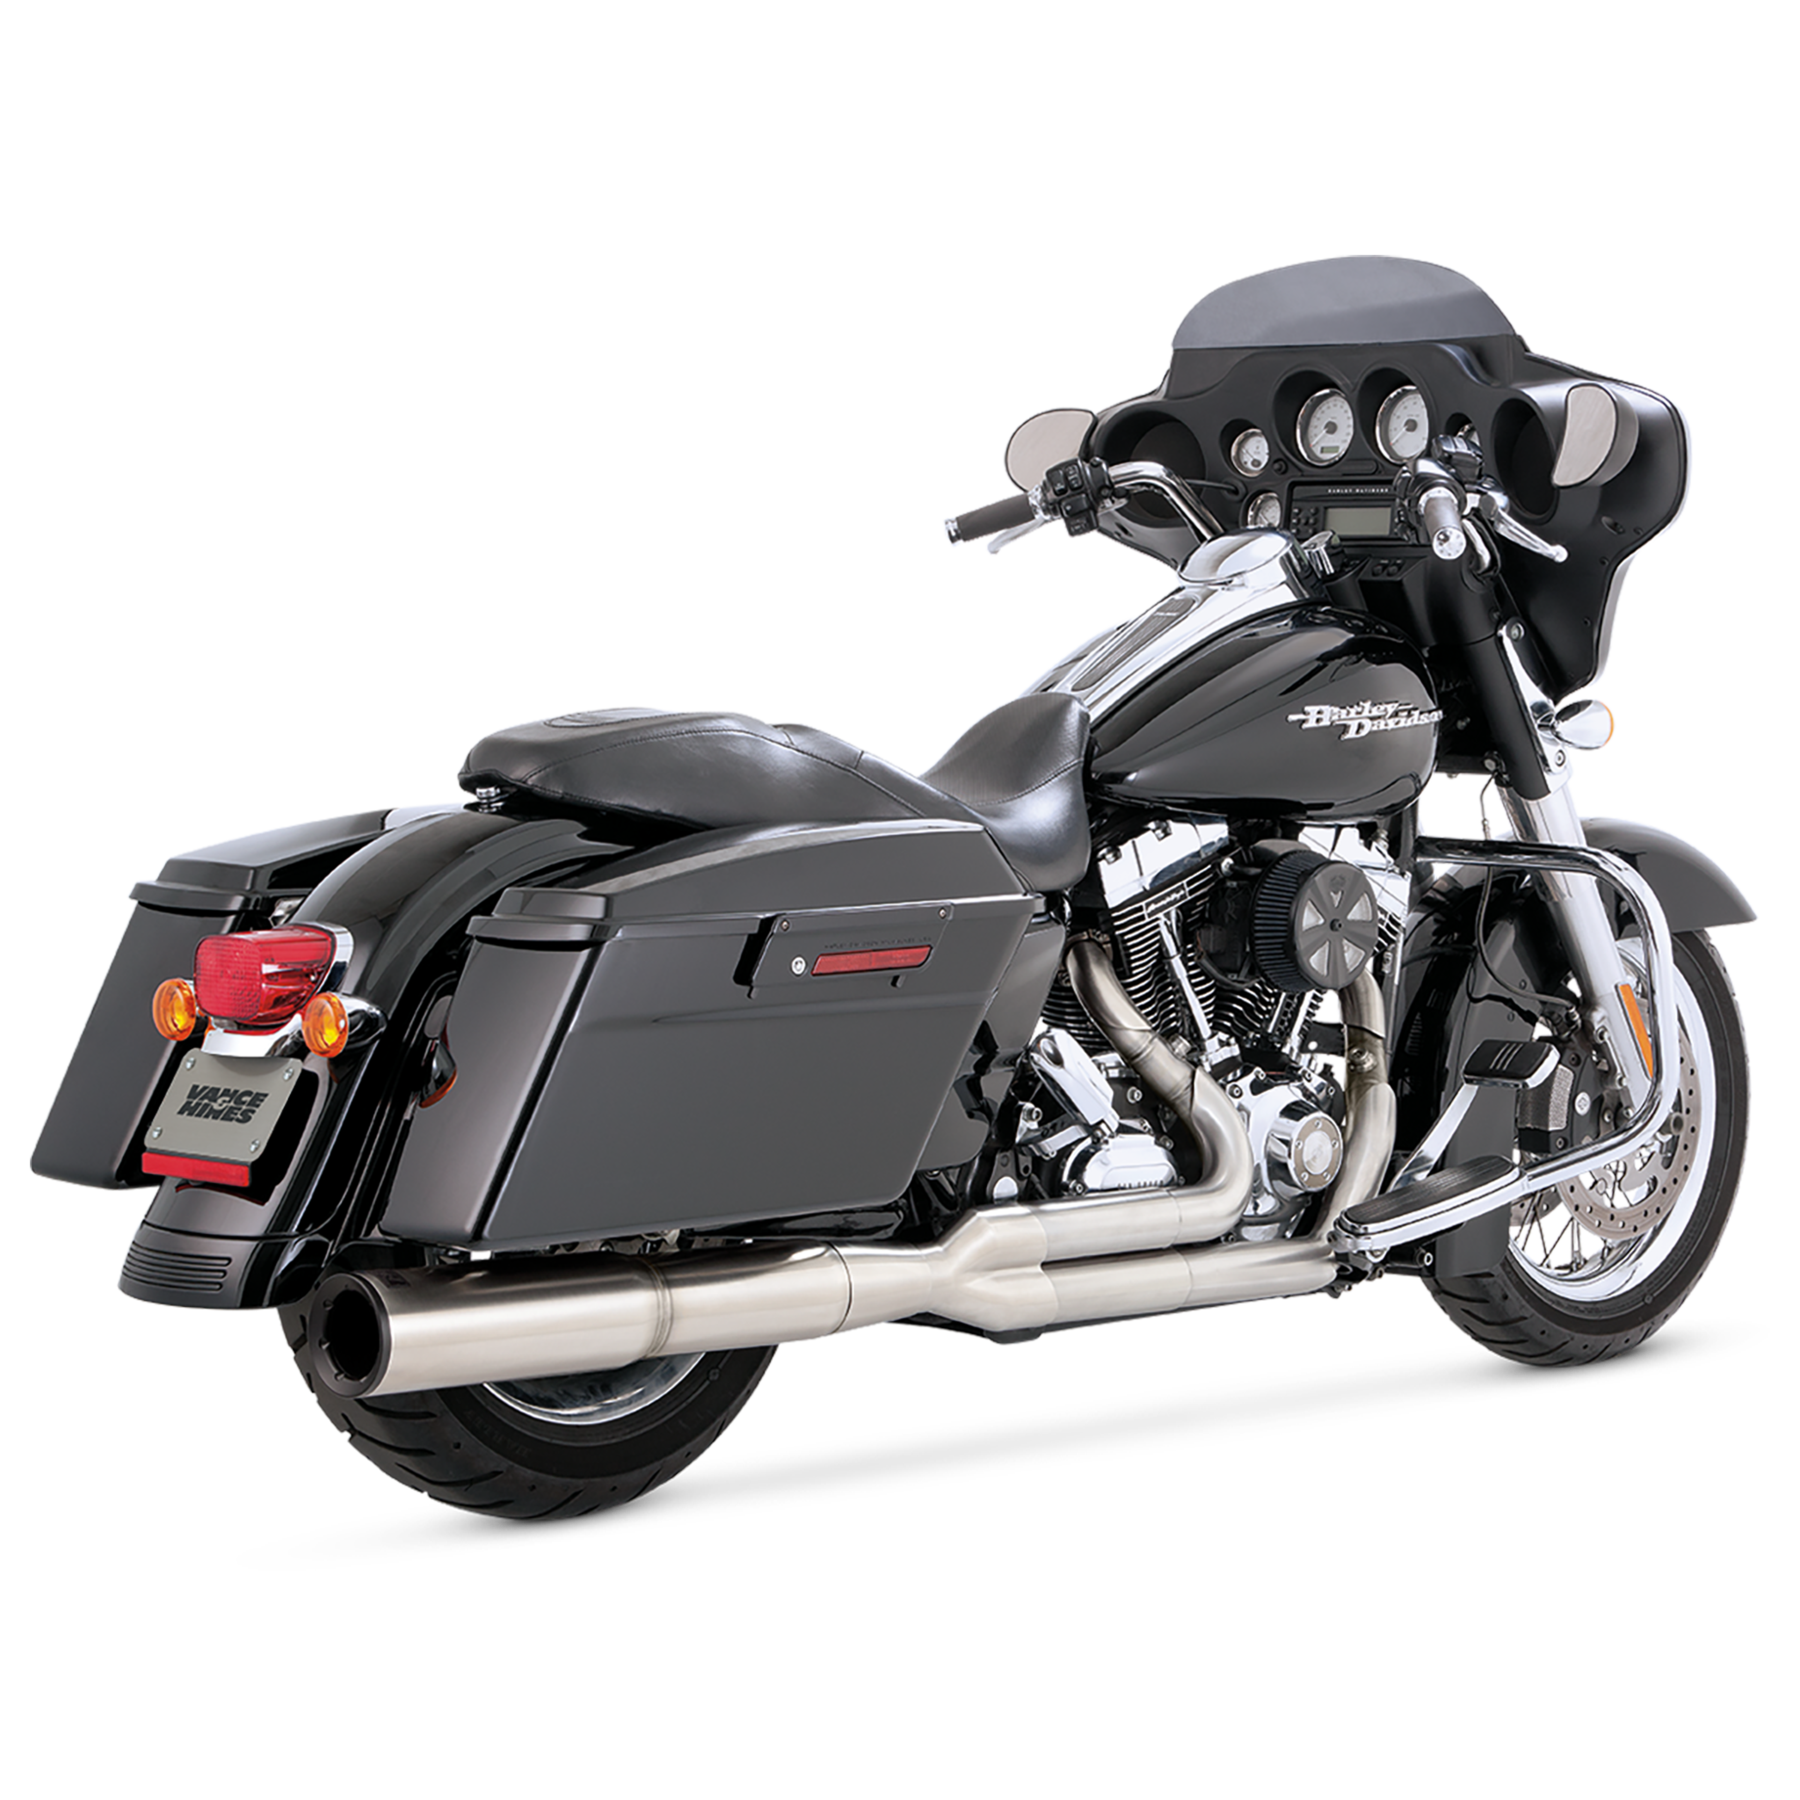 VANCE & HINES STAINLESS HI-OUTPUT 2-INTO-1